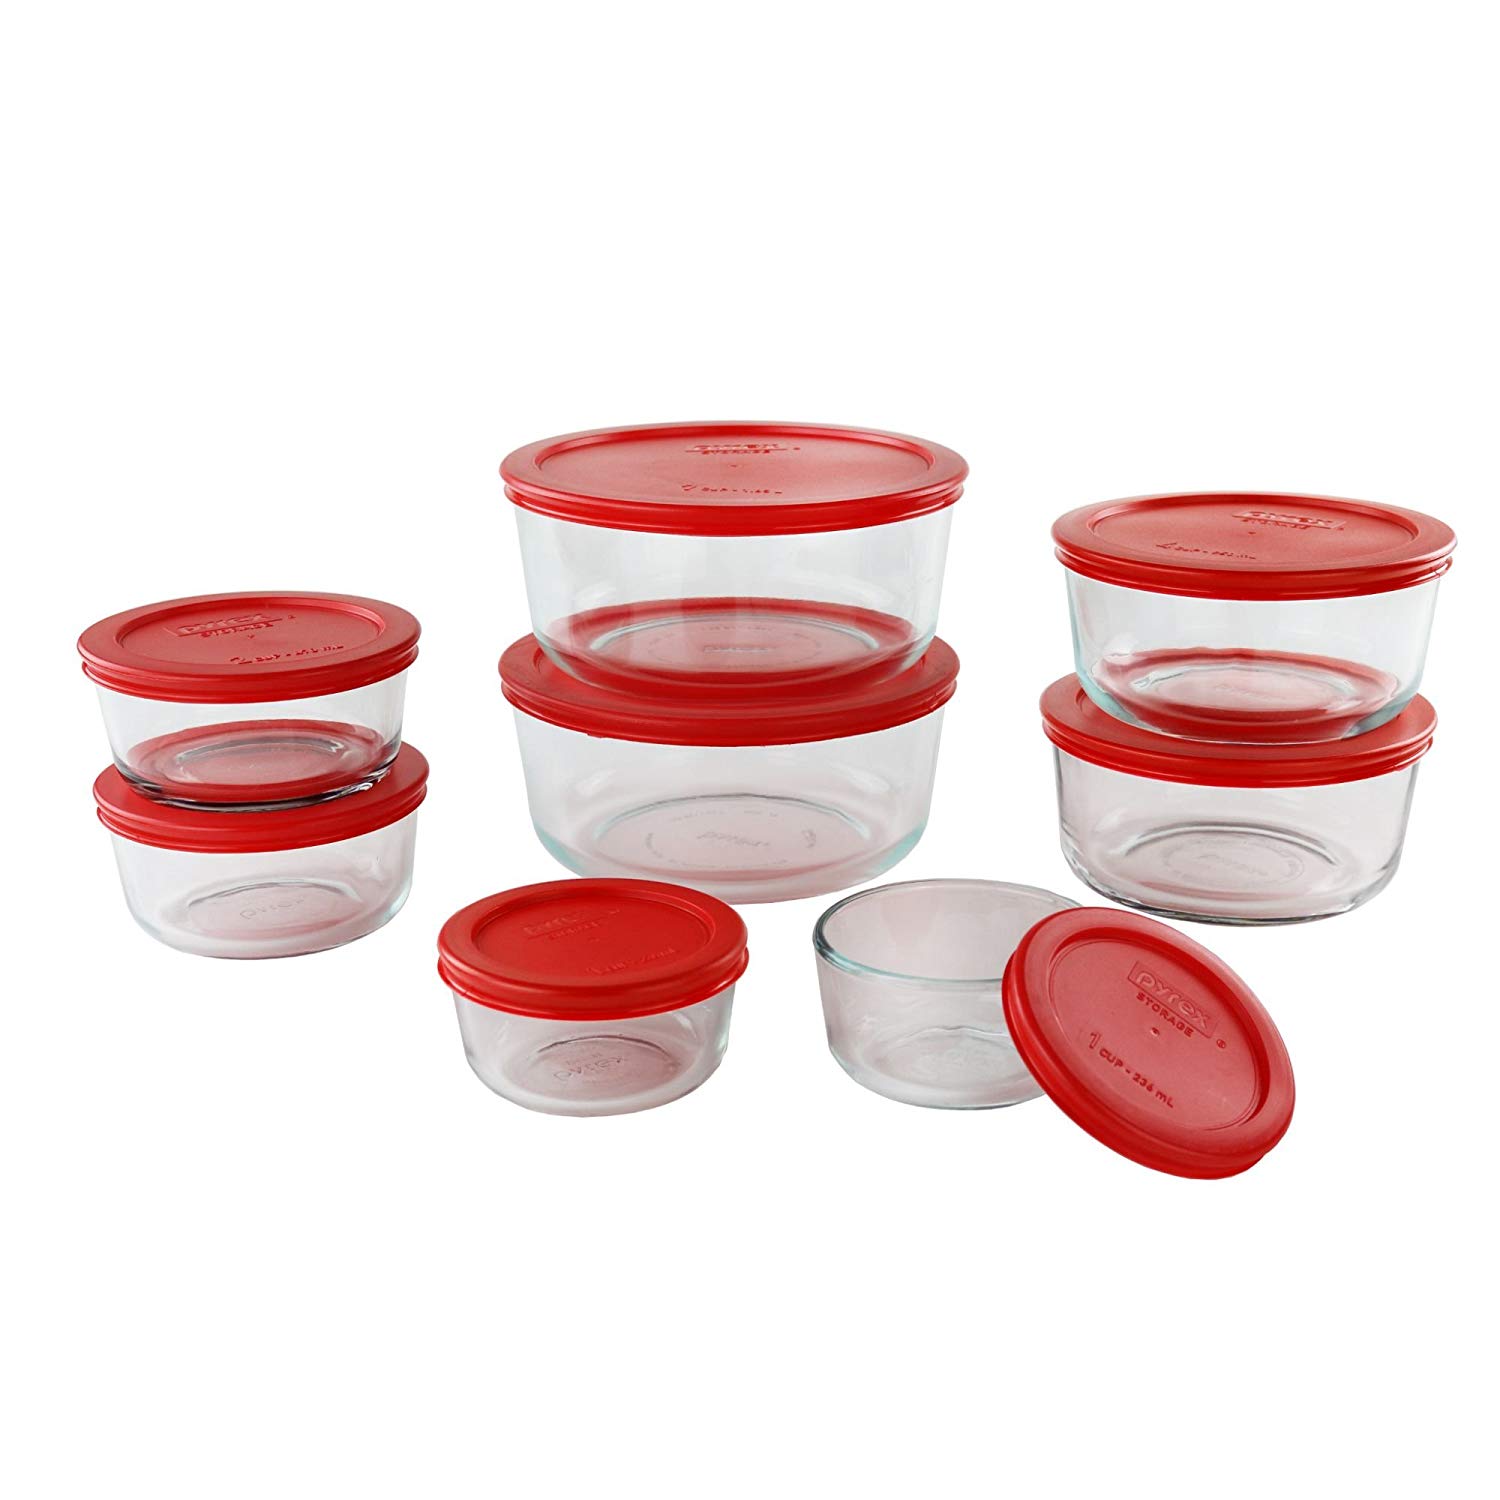 https://wurthorganizing.com/wp-content/uploads/2019/07/Pyrex-Simply-Store-Glass-Round-Food-Container-Set.jpg